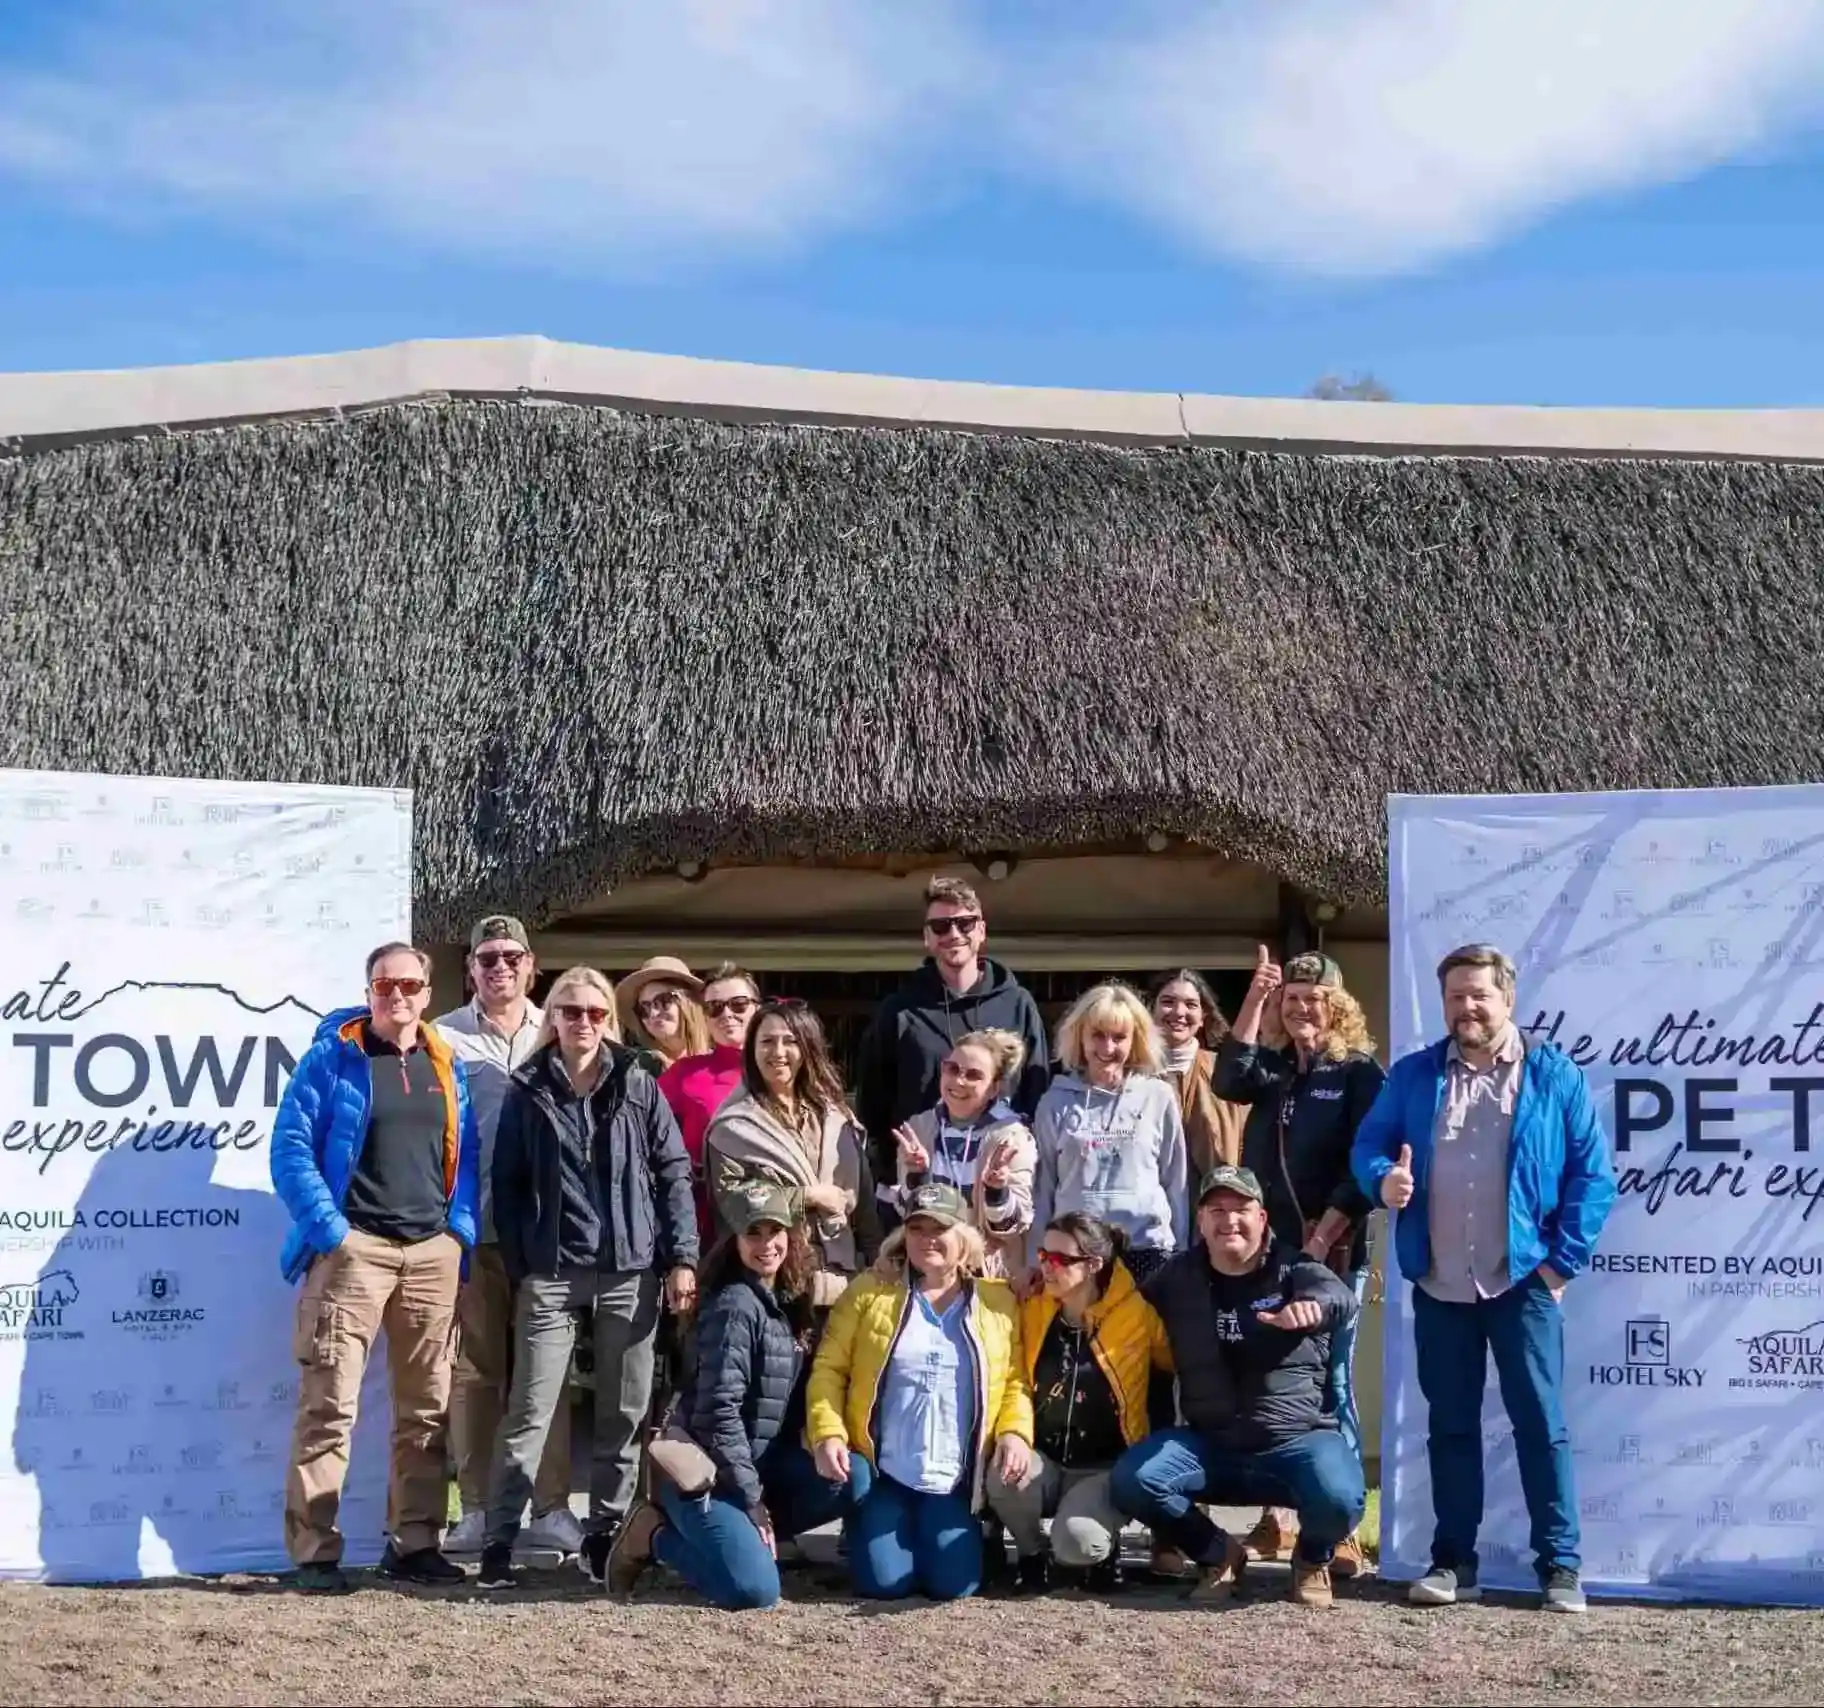 Past Experiences: Group of Polish media and tourism representatives in front of the Ultimate Cape Town Safari Experience banner